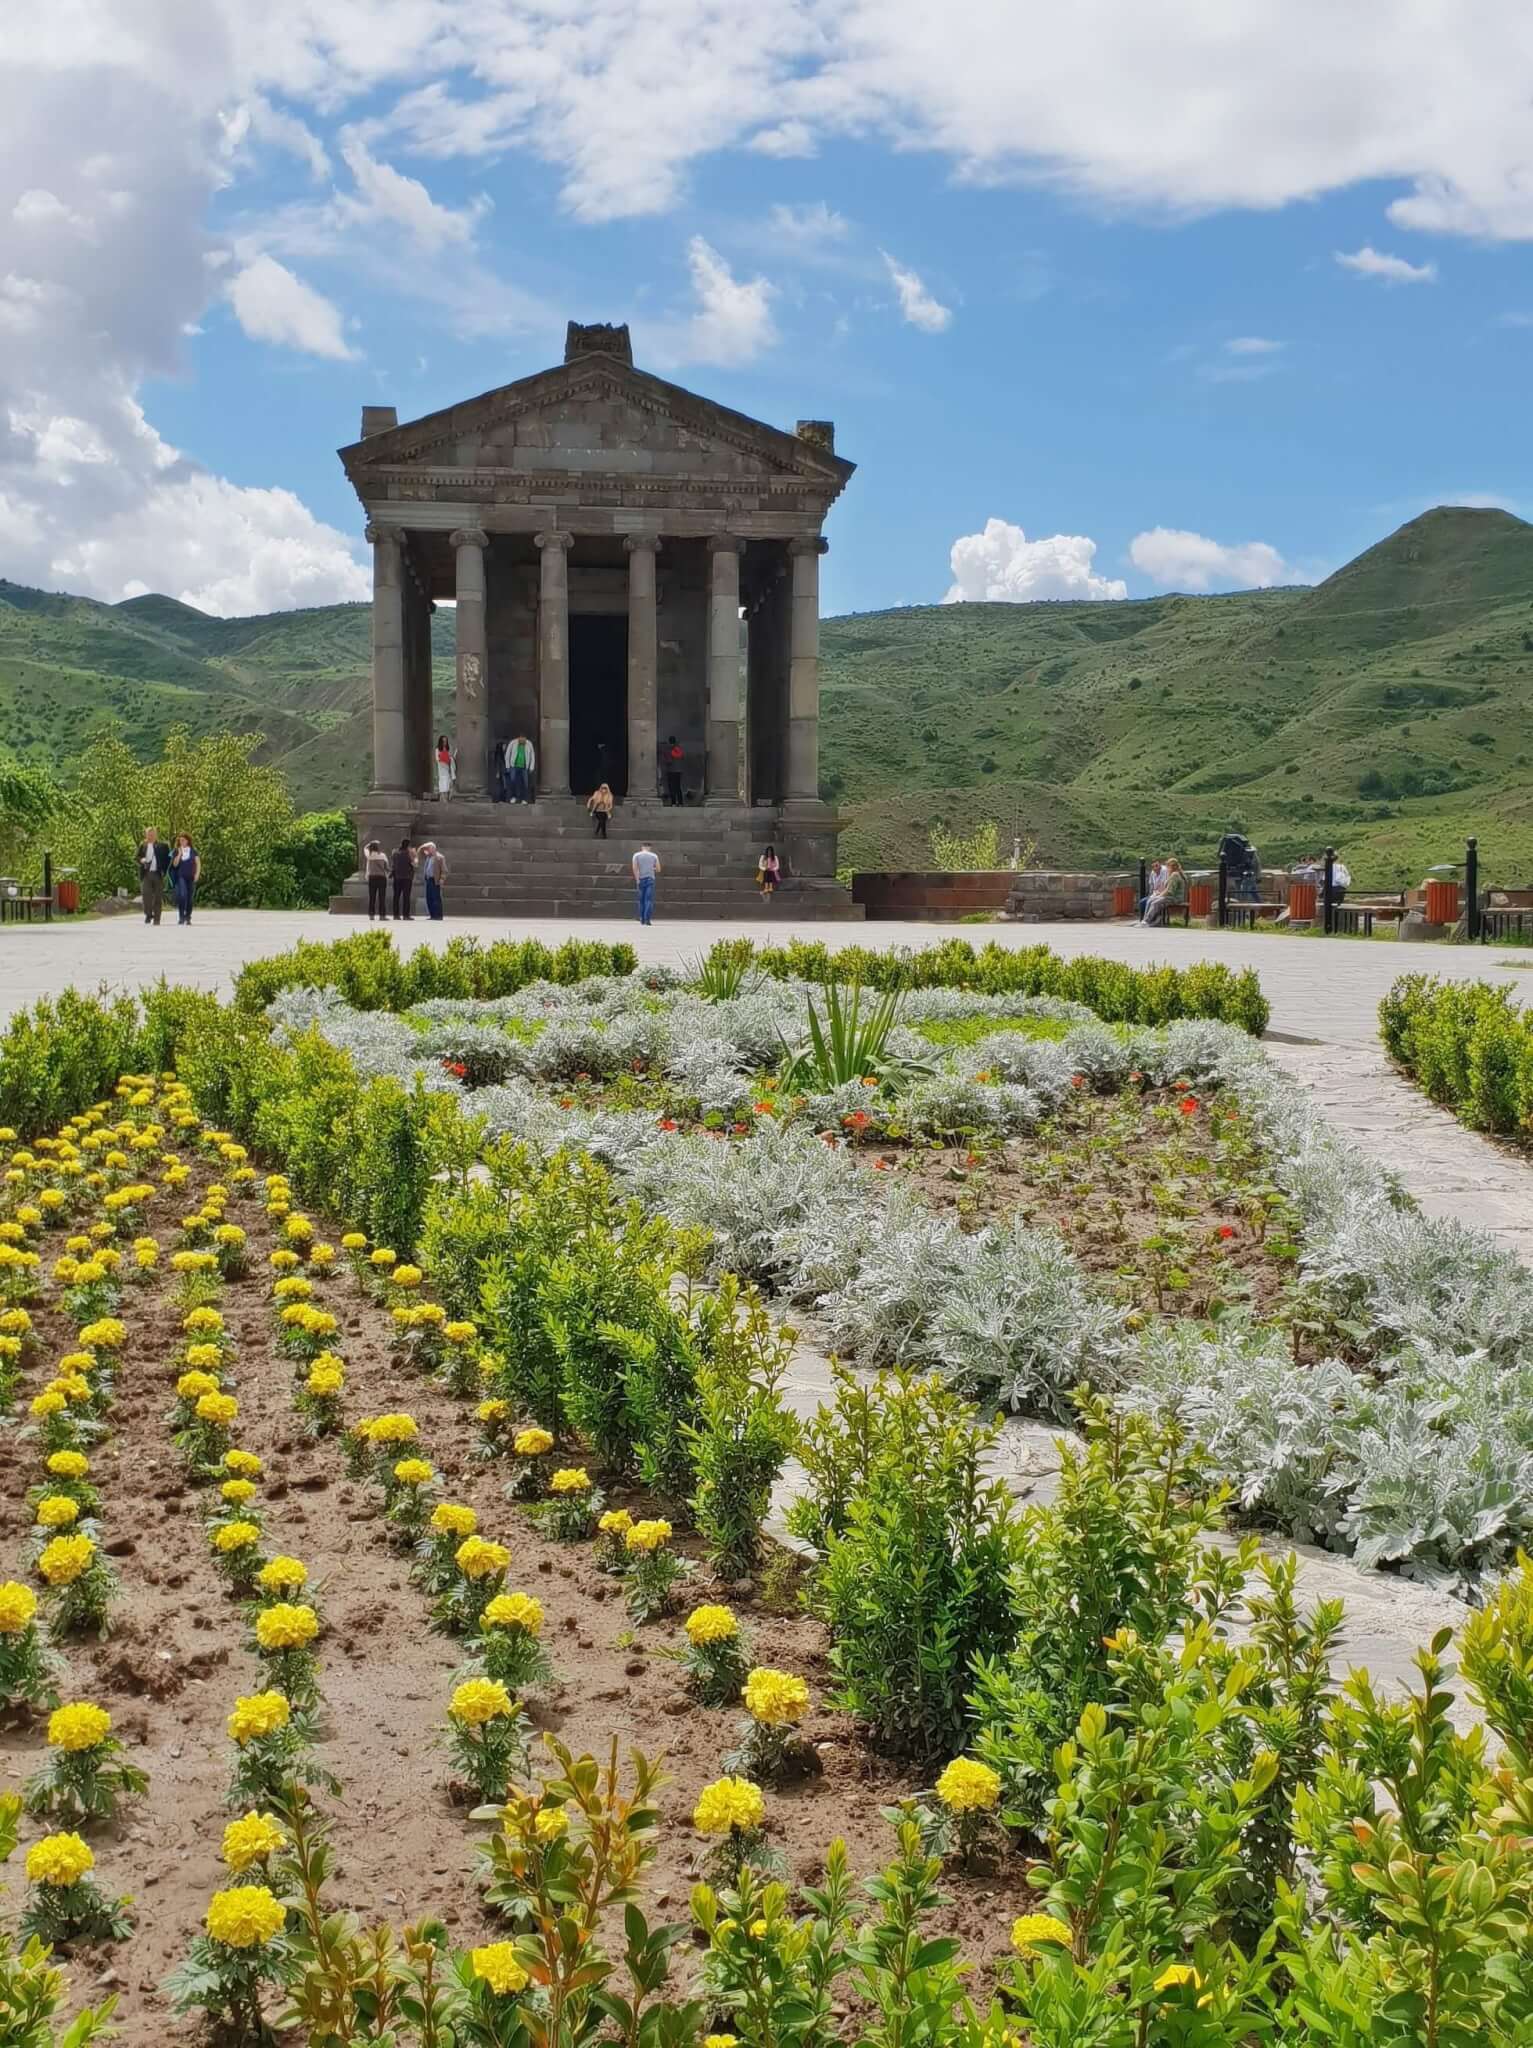 The Pagan Temple of Garni is one of the top places to visit in Armenia